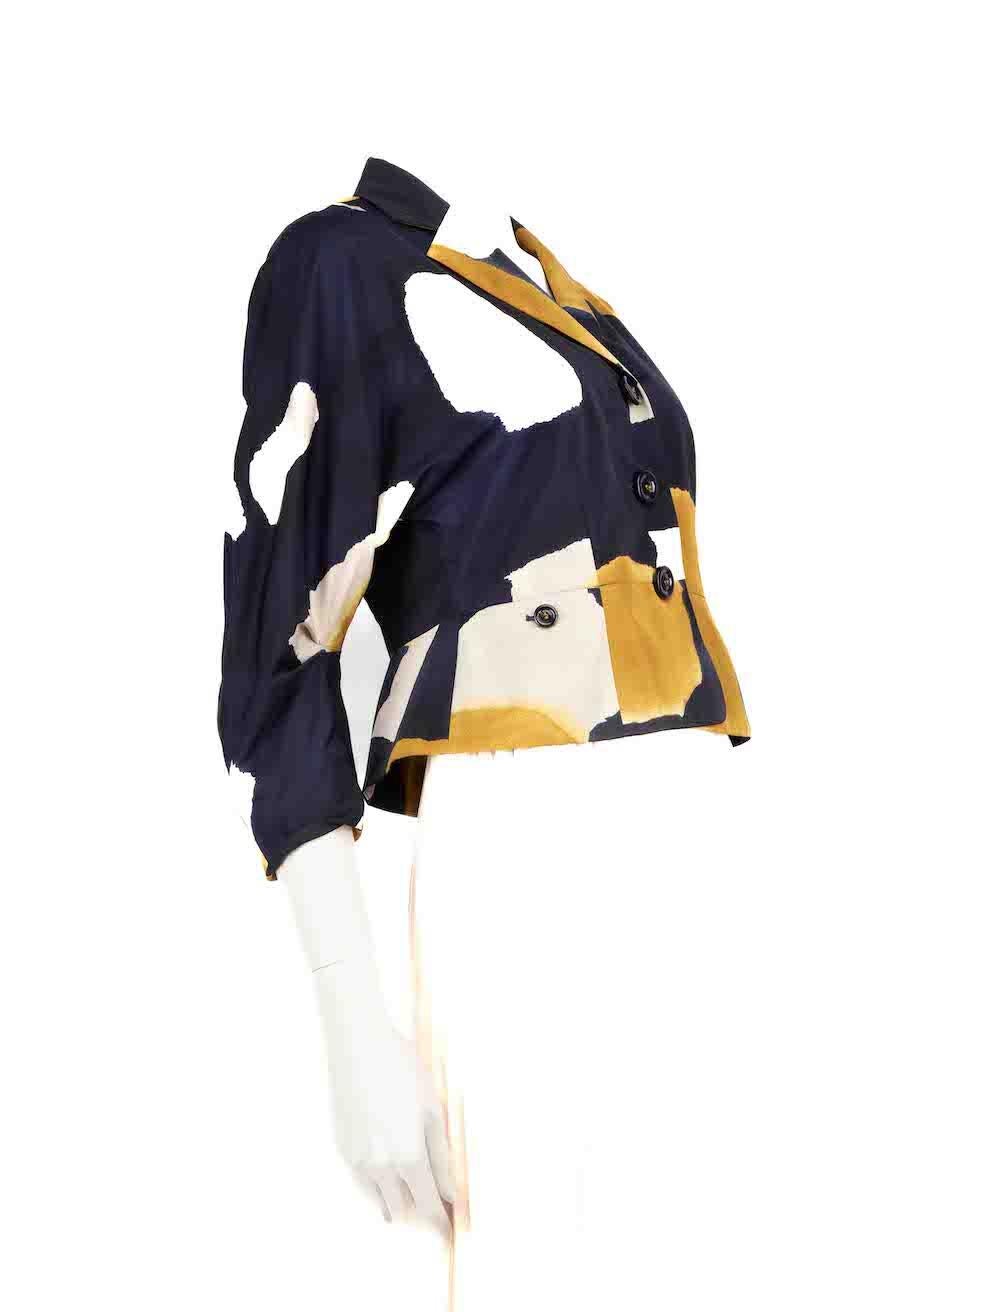 CONDITION is Very good. Minimal wear to the jacket is evident. Minimal discolouration on the left sleeve on this used Moschino Cheap & Chic designer resale item.
 
 
 
 Details
 
 
 Multicolour- navy, yellow, white
 
 Polyester
 
 Jacket
 
 Abstract